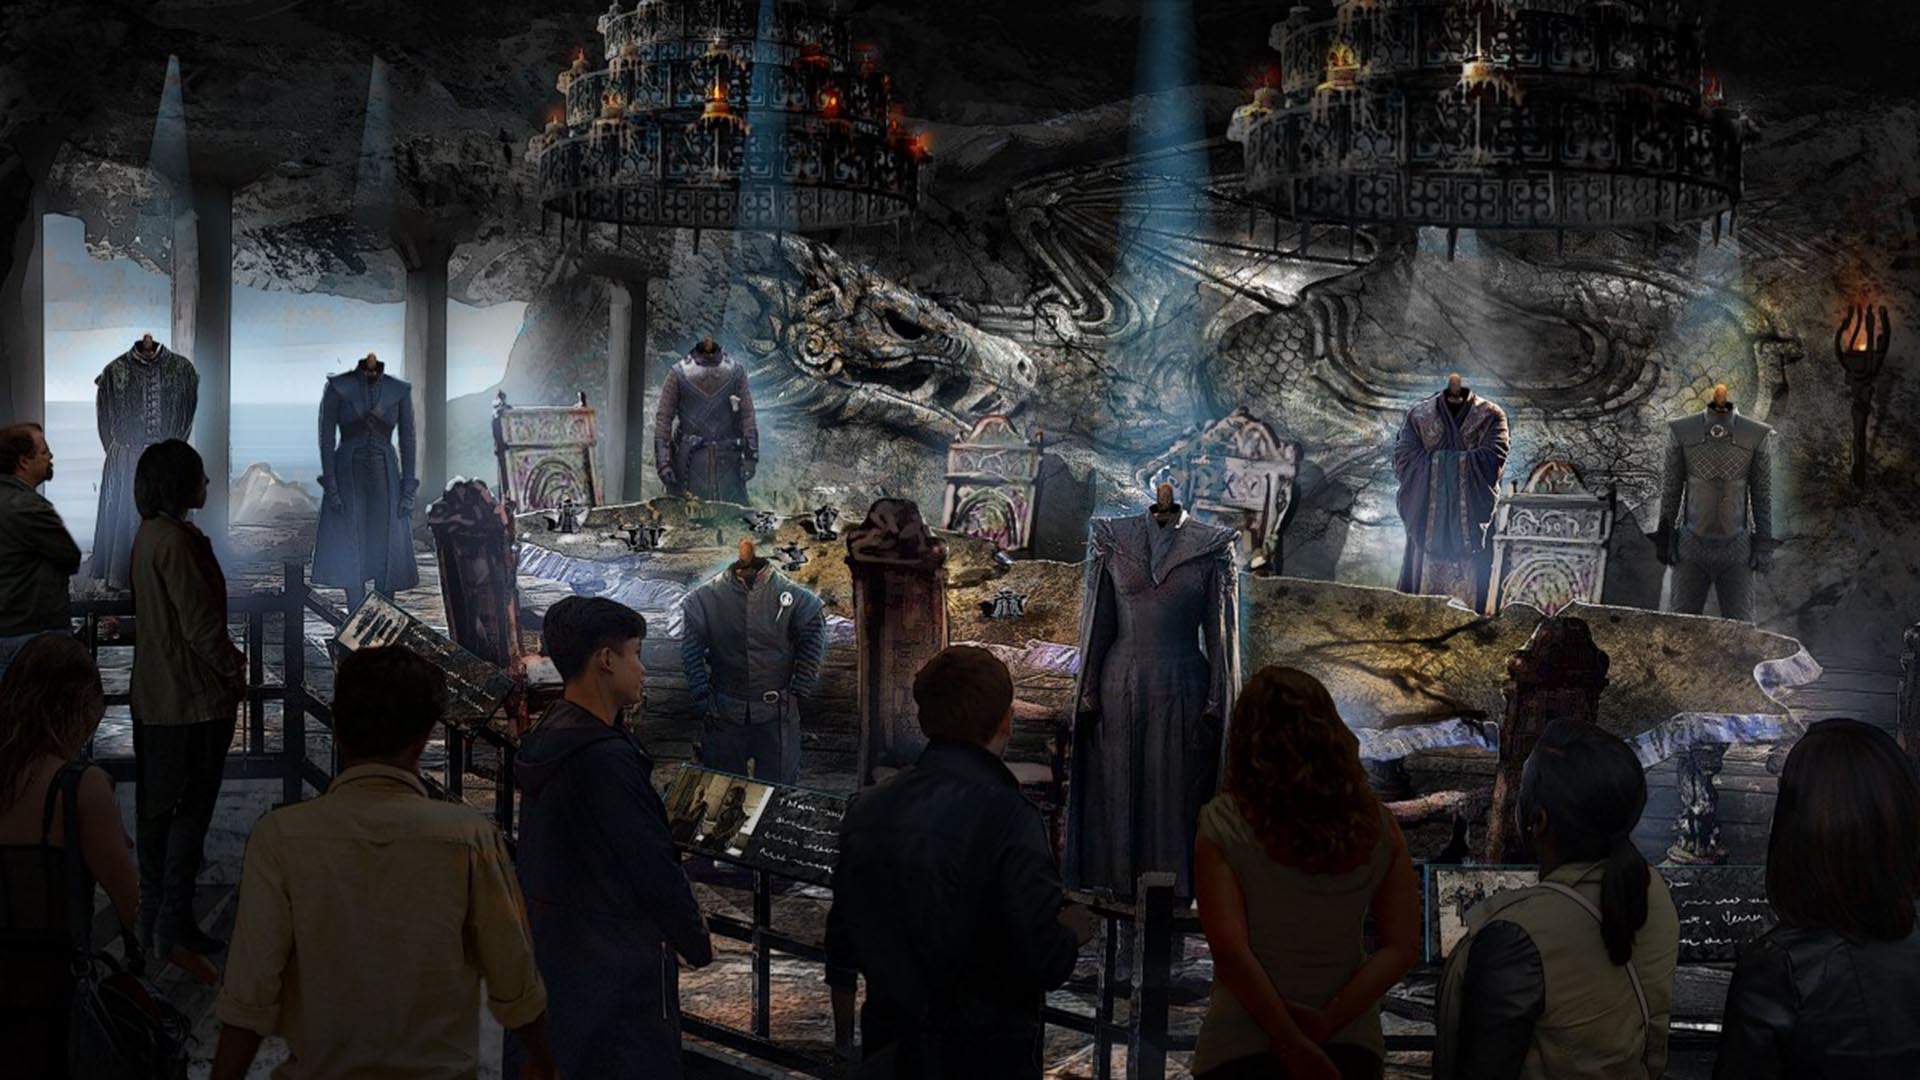 This Huge New 'Game of Thrones' Tour Will Take You Through the Show's Sets, Costumes and Props